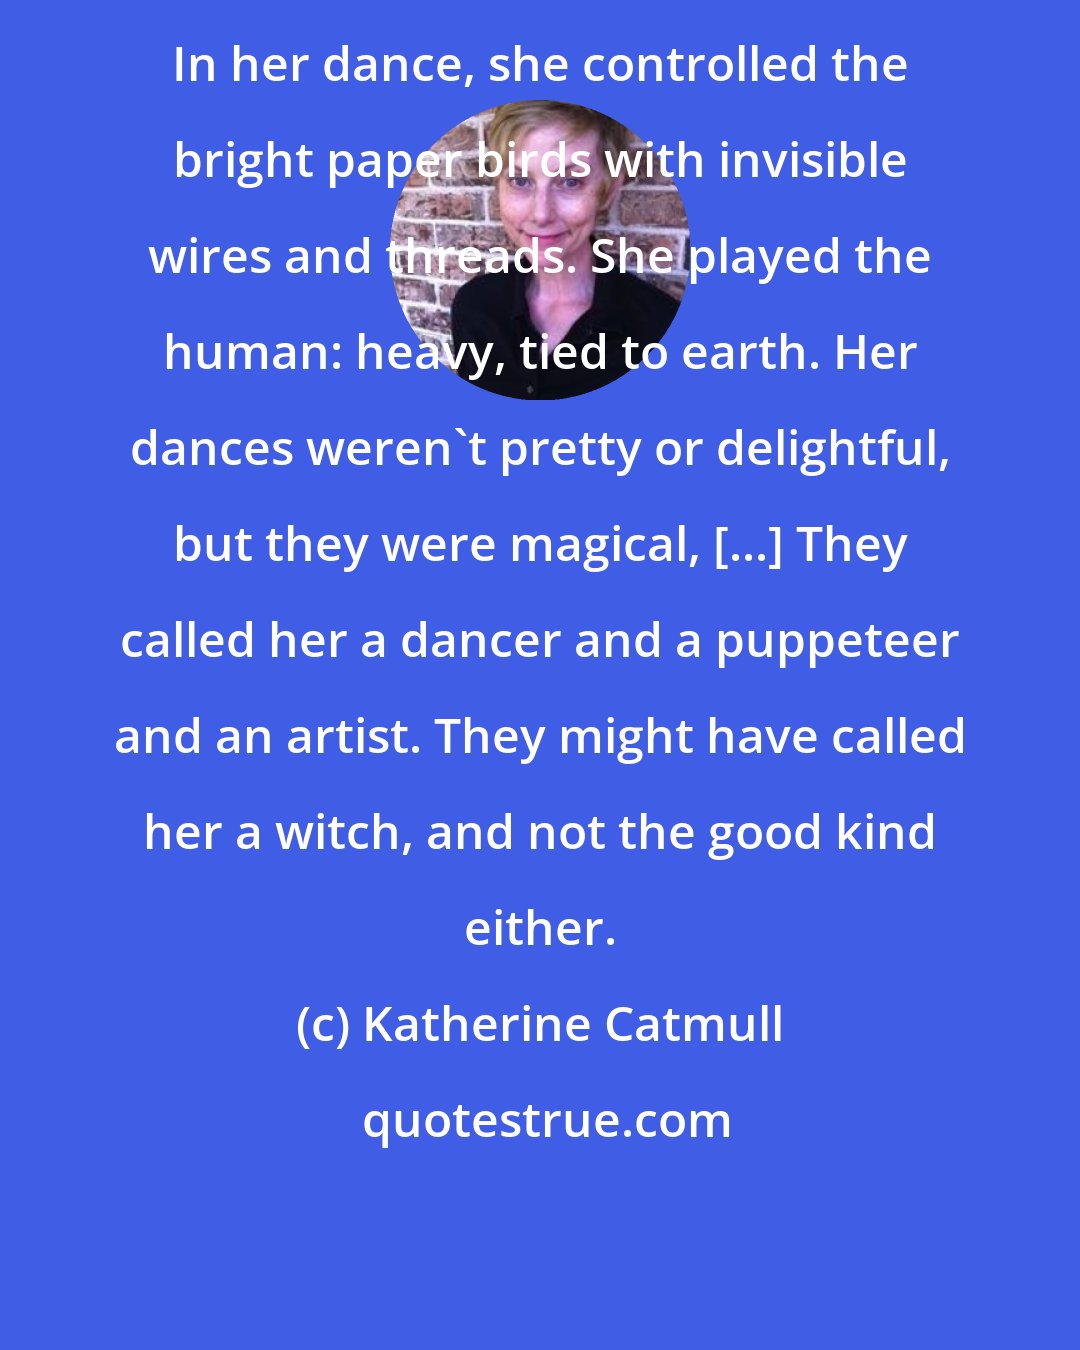 Katherine Catmull: In her dance, she controlled the bright paper birds with invisible wires and threads. She played the human: heavy, tied to earth. Her dances weren't pretty or delightful, but they were magical, [...] They called her a dancer and a puppeteer and an artist. They might have called her a witch, and not the good kind either.